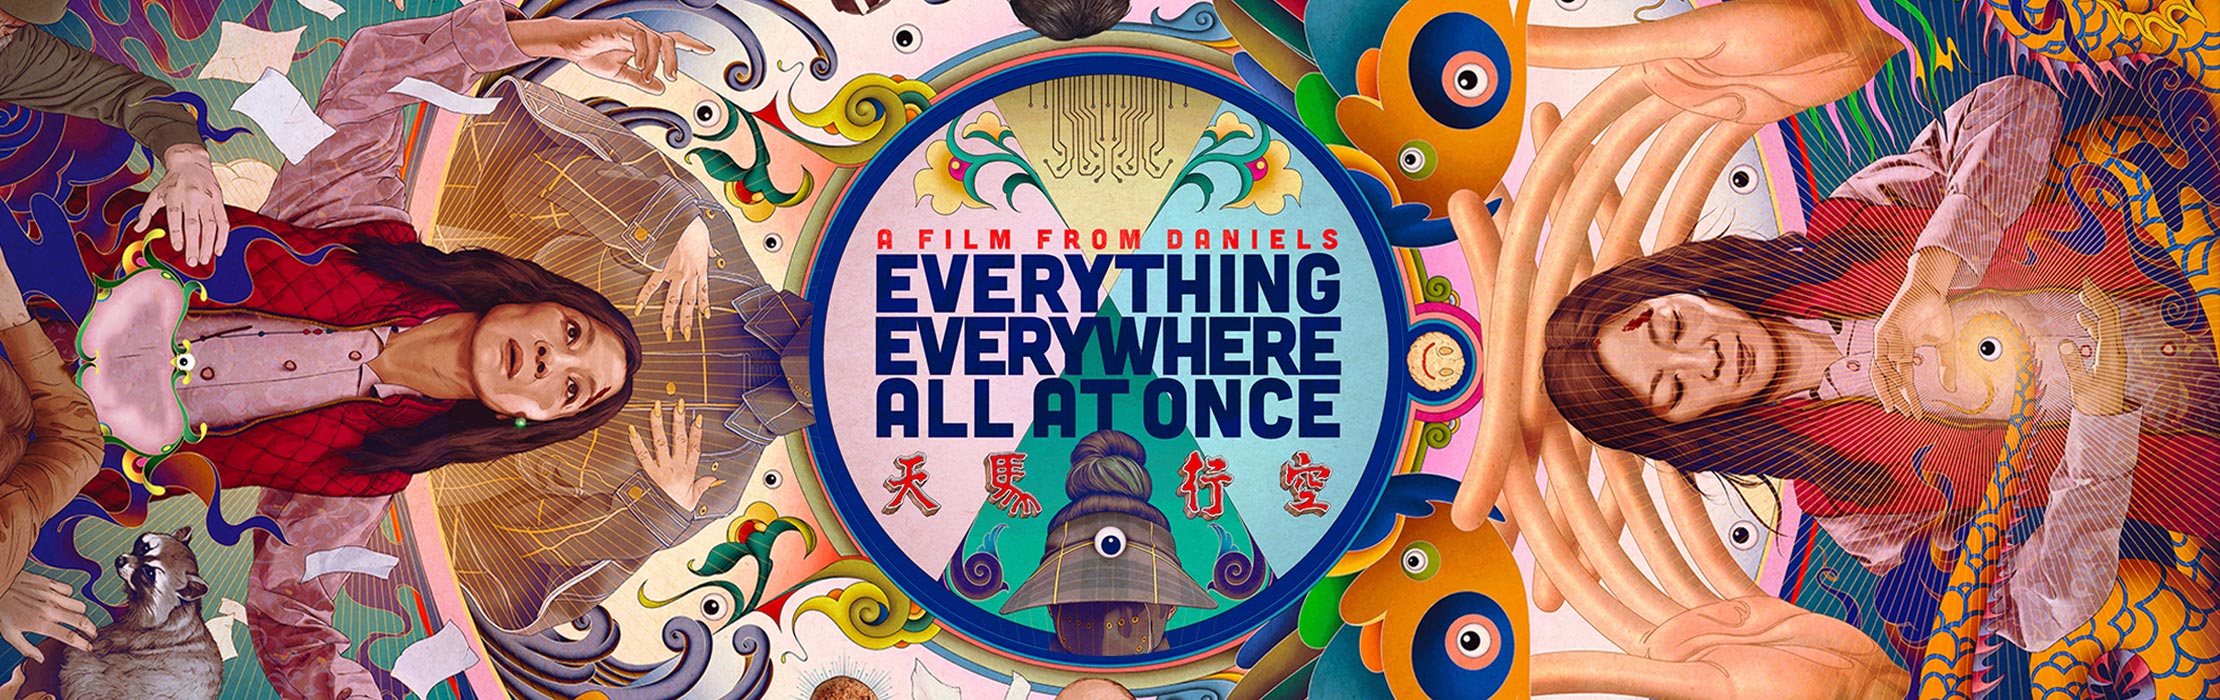 Everything Everywhere All at Once | Film Info and Screening Times |The  Cinema in The Arches